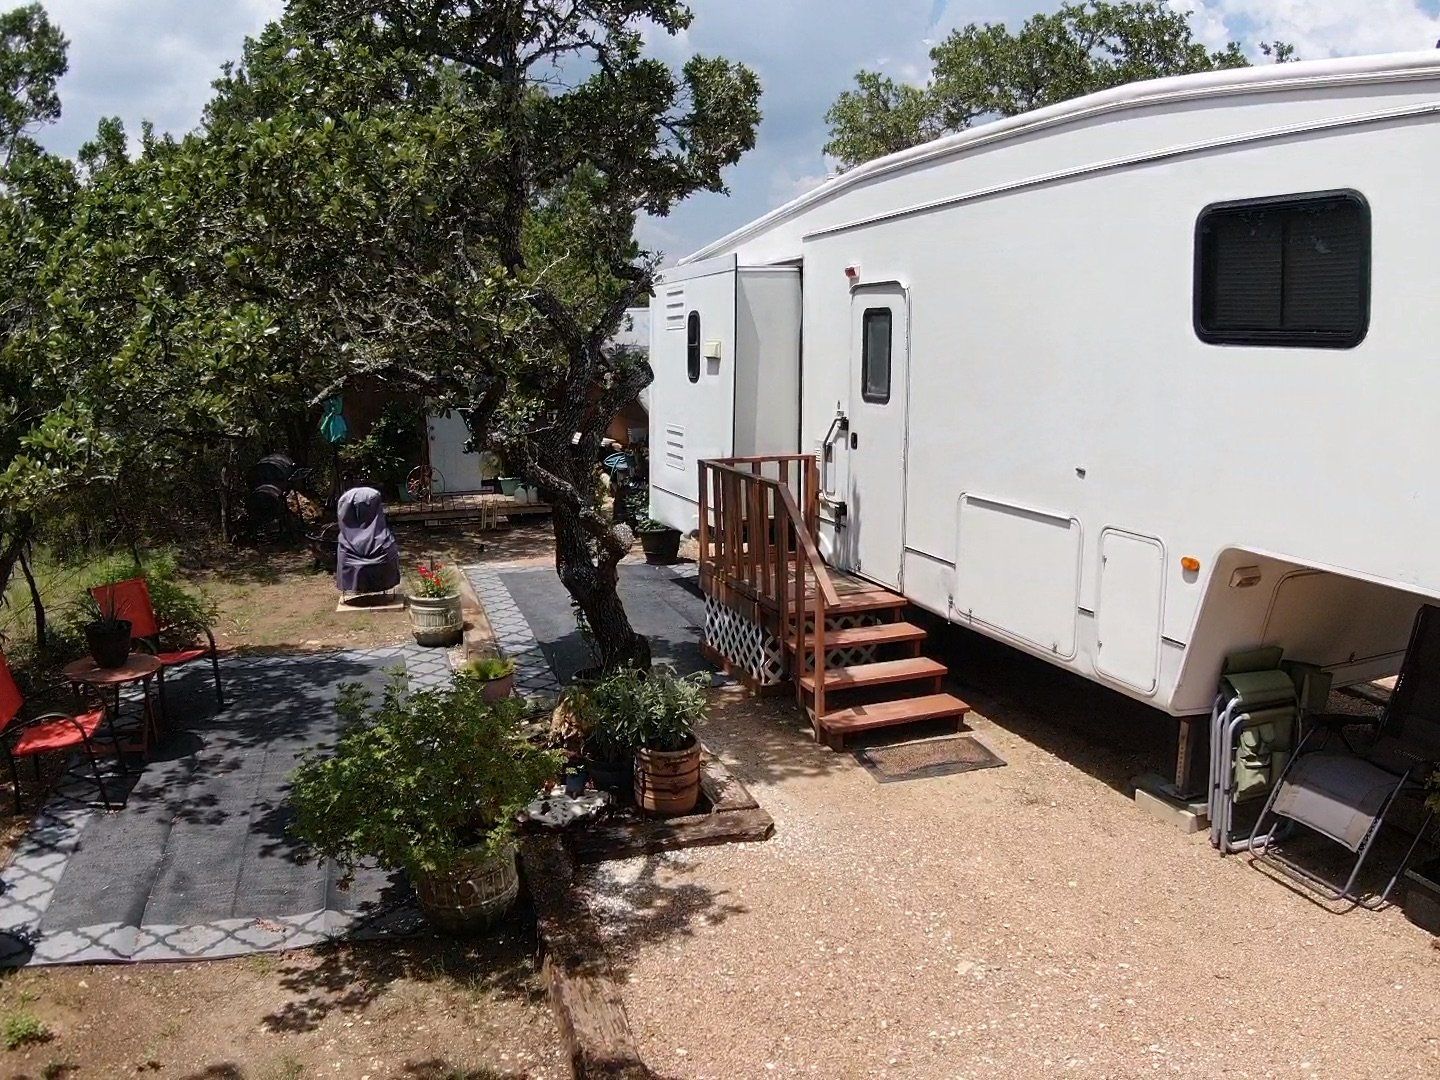 Full-time living in your motorhome, travel trailer, or your fifth-wheel camper near Austin, TX. at Oak Meadows RV Park in Canyon Lake, Texas!